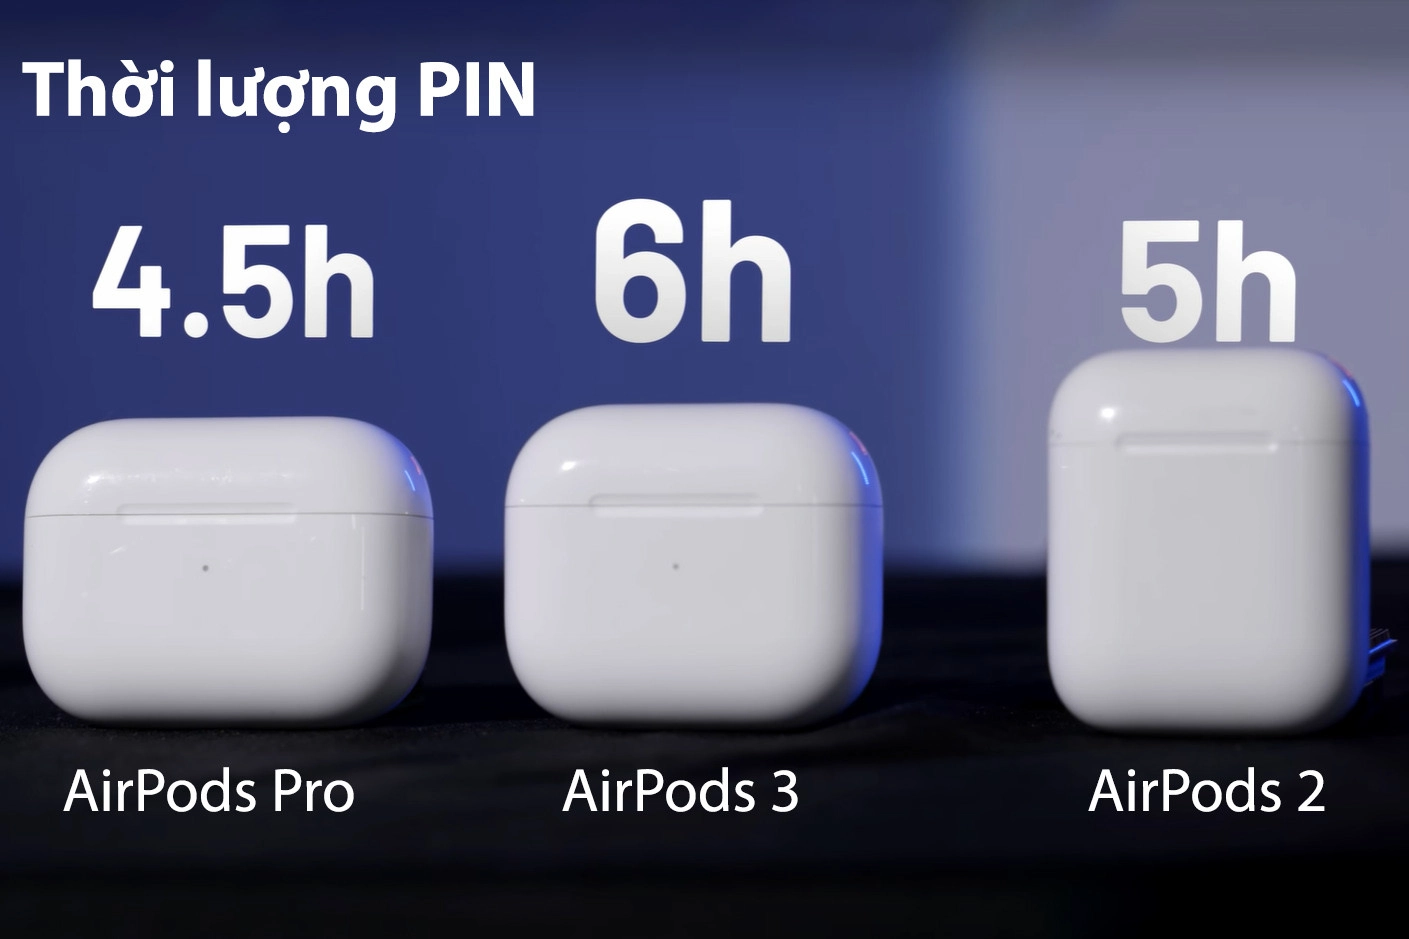 airpods-pro-chinh-hang-sovoi-airpods-3-2